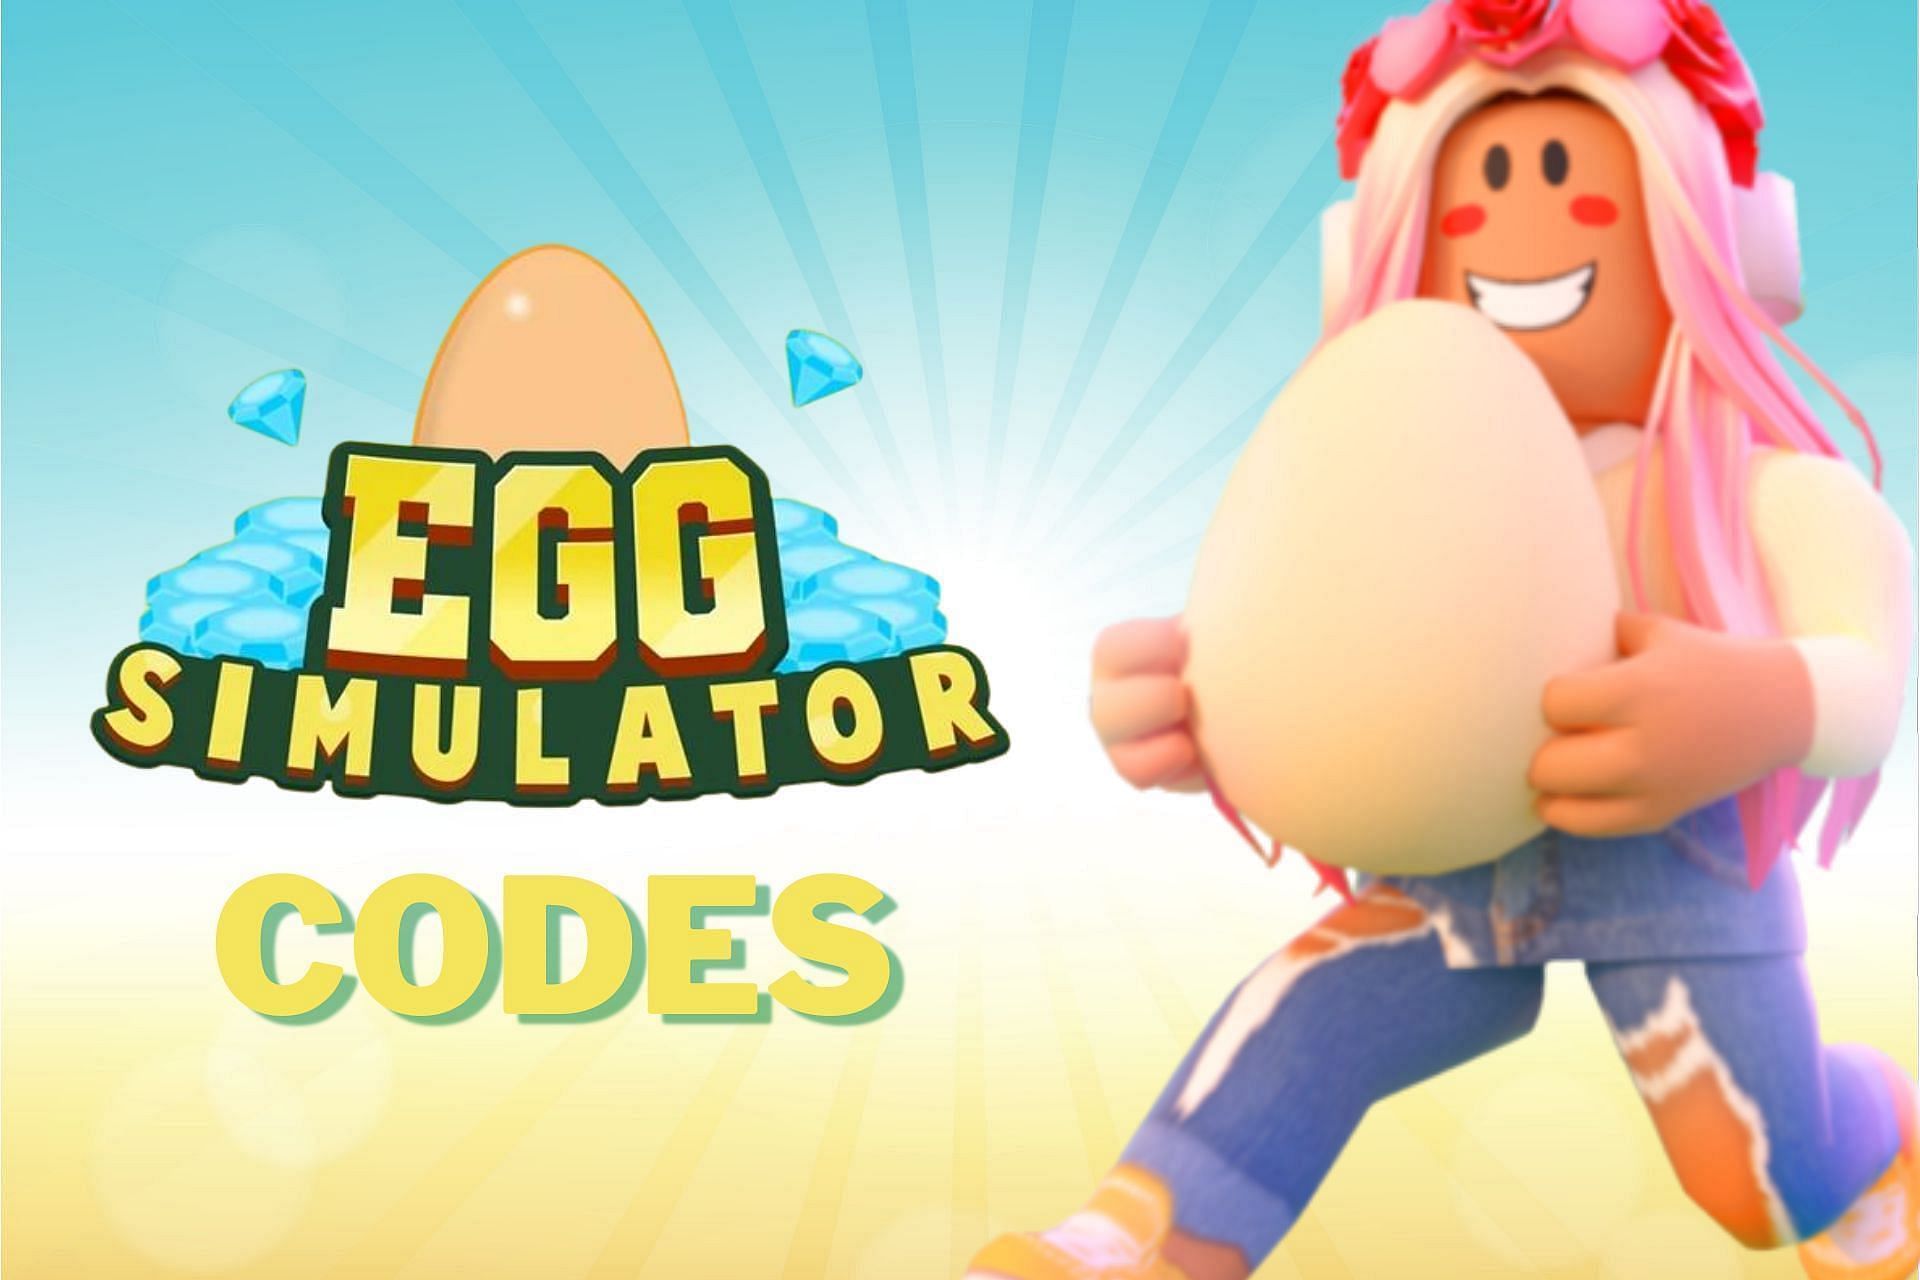 roblox-egg-simulator-codes-in-january-2023-free-gems-pets-and-more